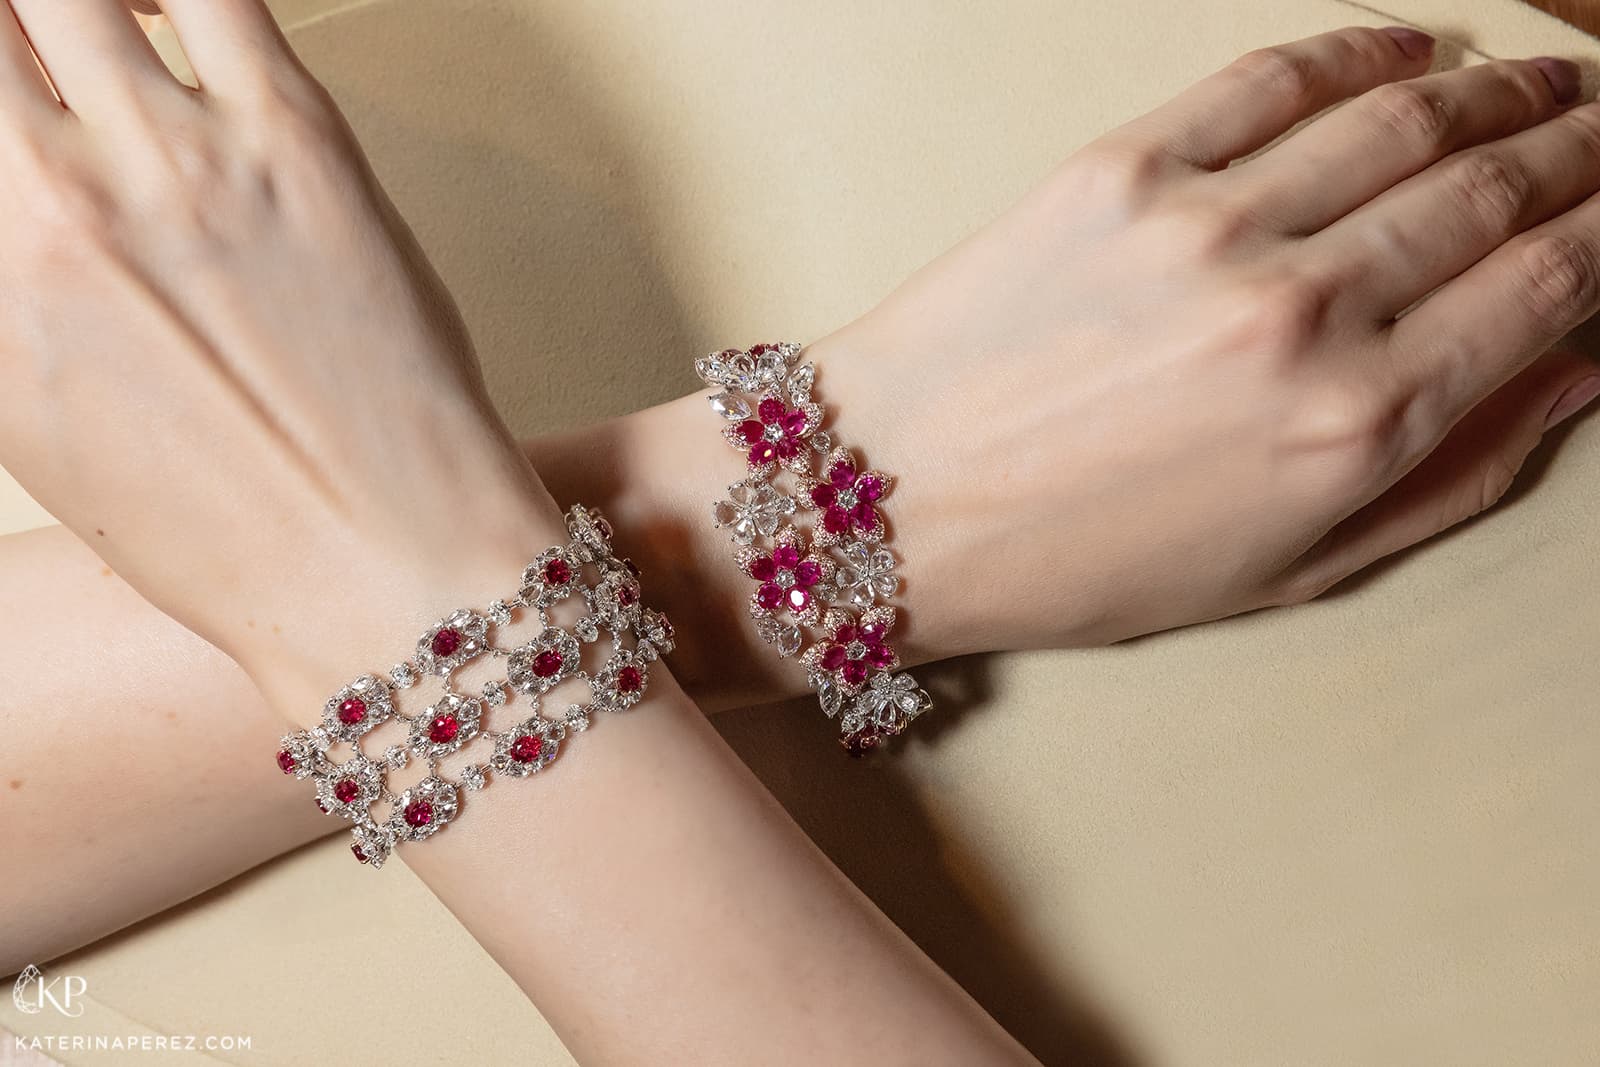 Novel Fine Jewelry bracelets with rubies and diamonds in white gold